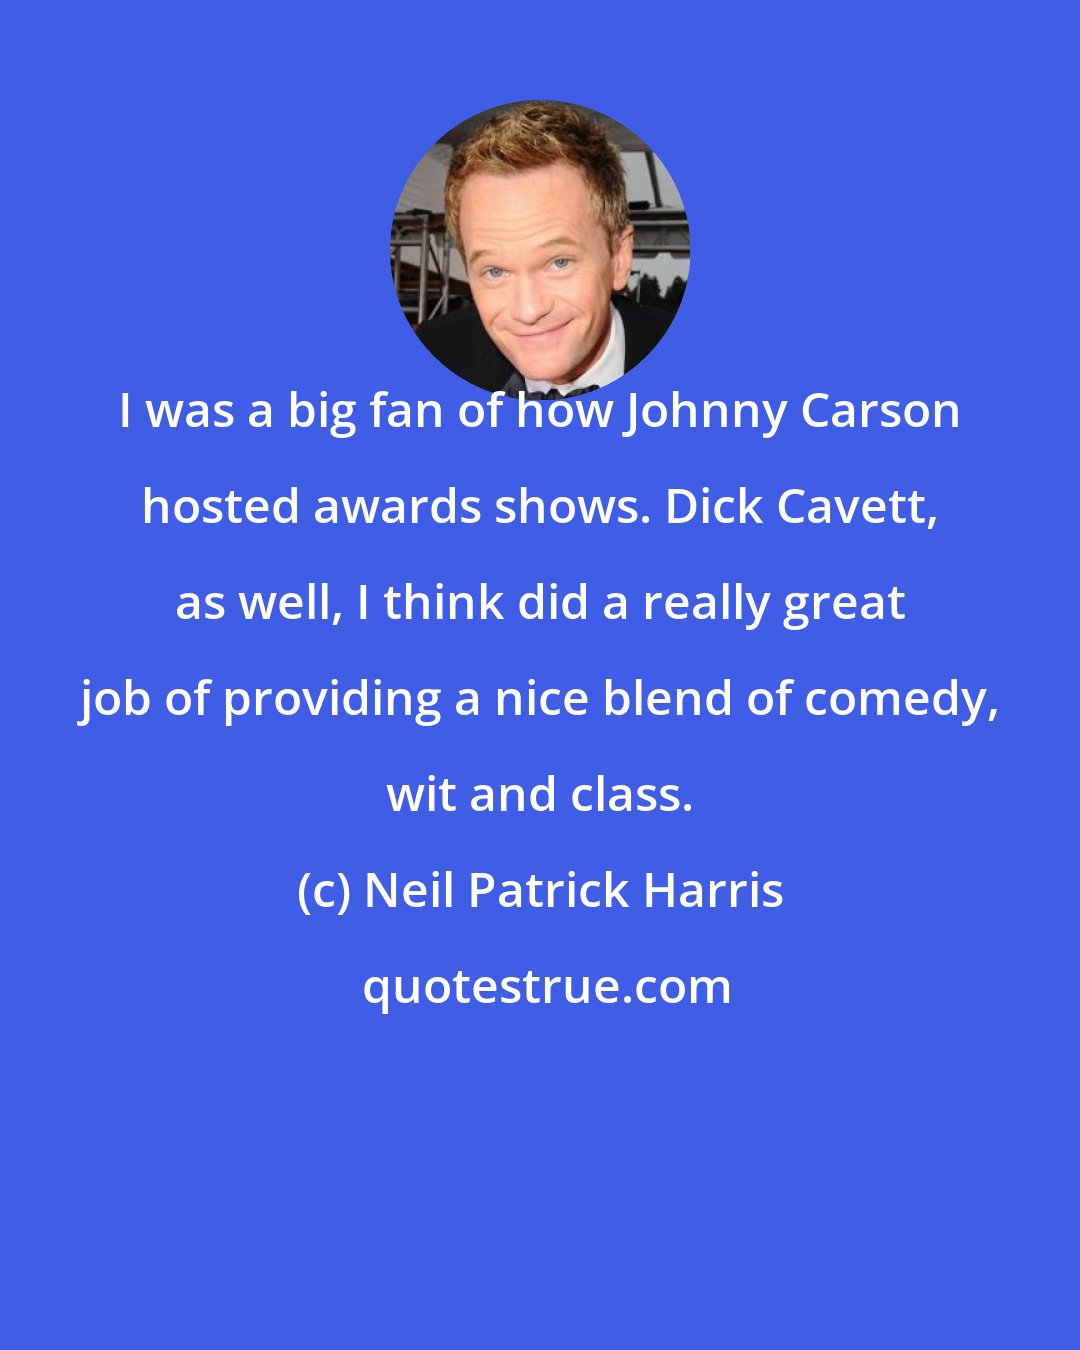 Neil Patrick Harris: I was a big fan of how Johnny Carson hosted awards shows. Dick Cavett, as well, I think did a really great job of providing a nice blend of comedy, wit and class.